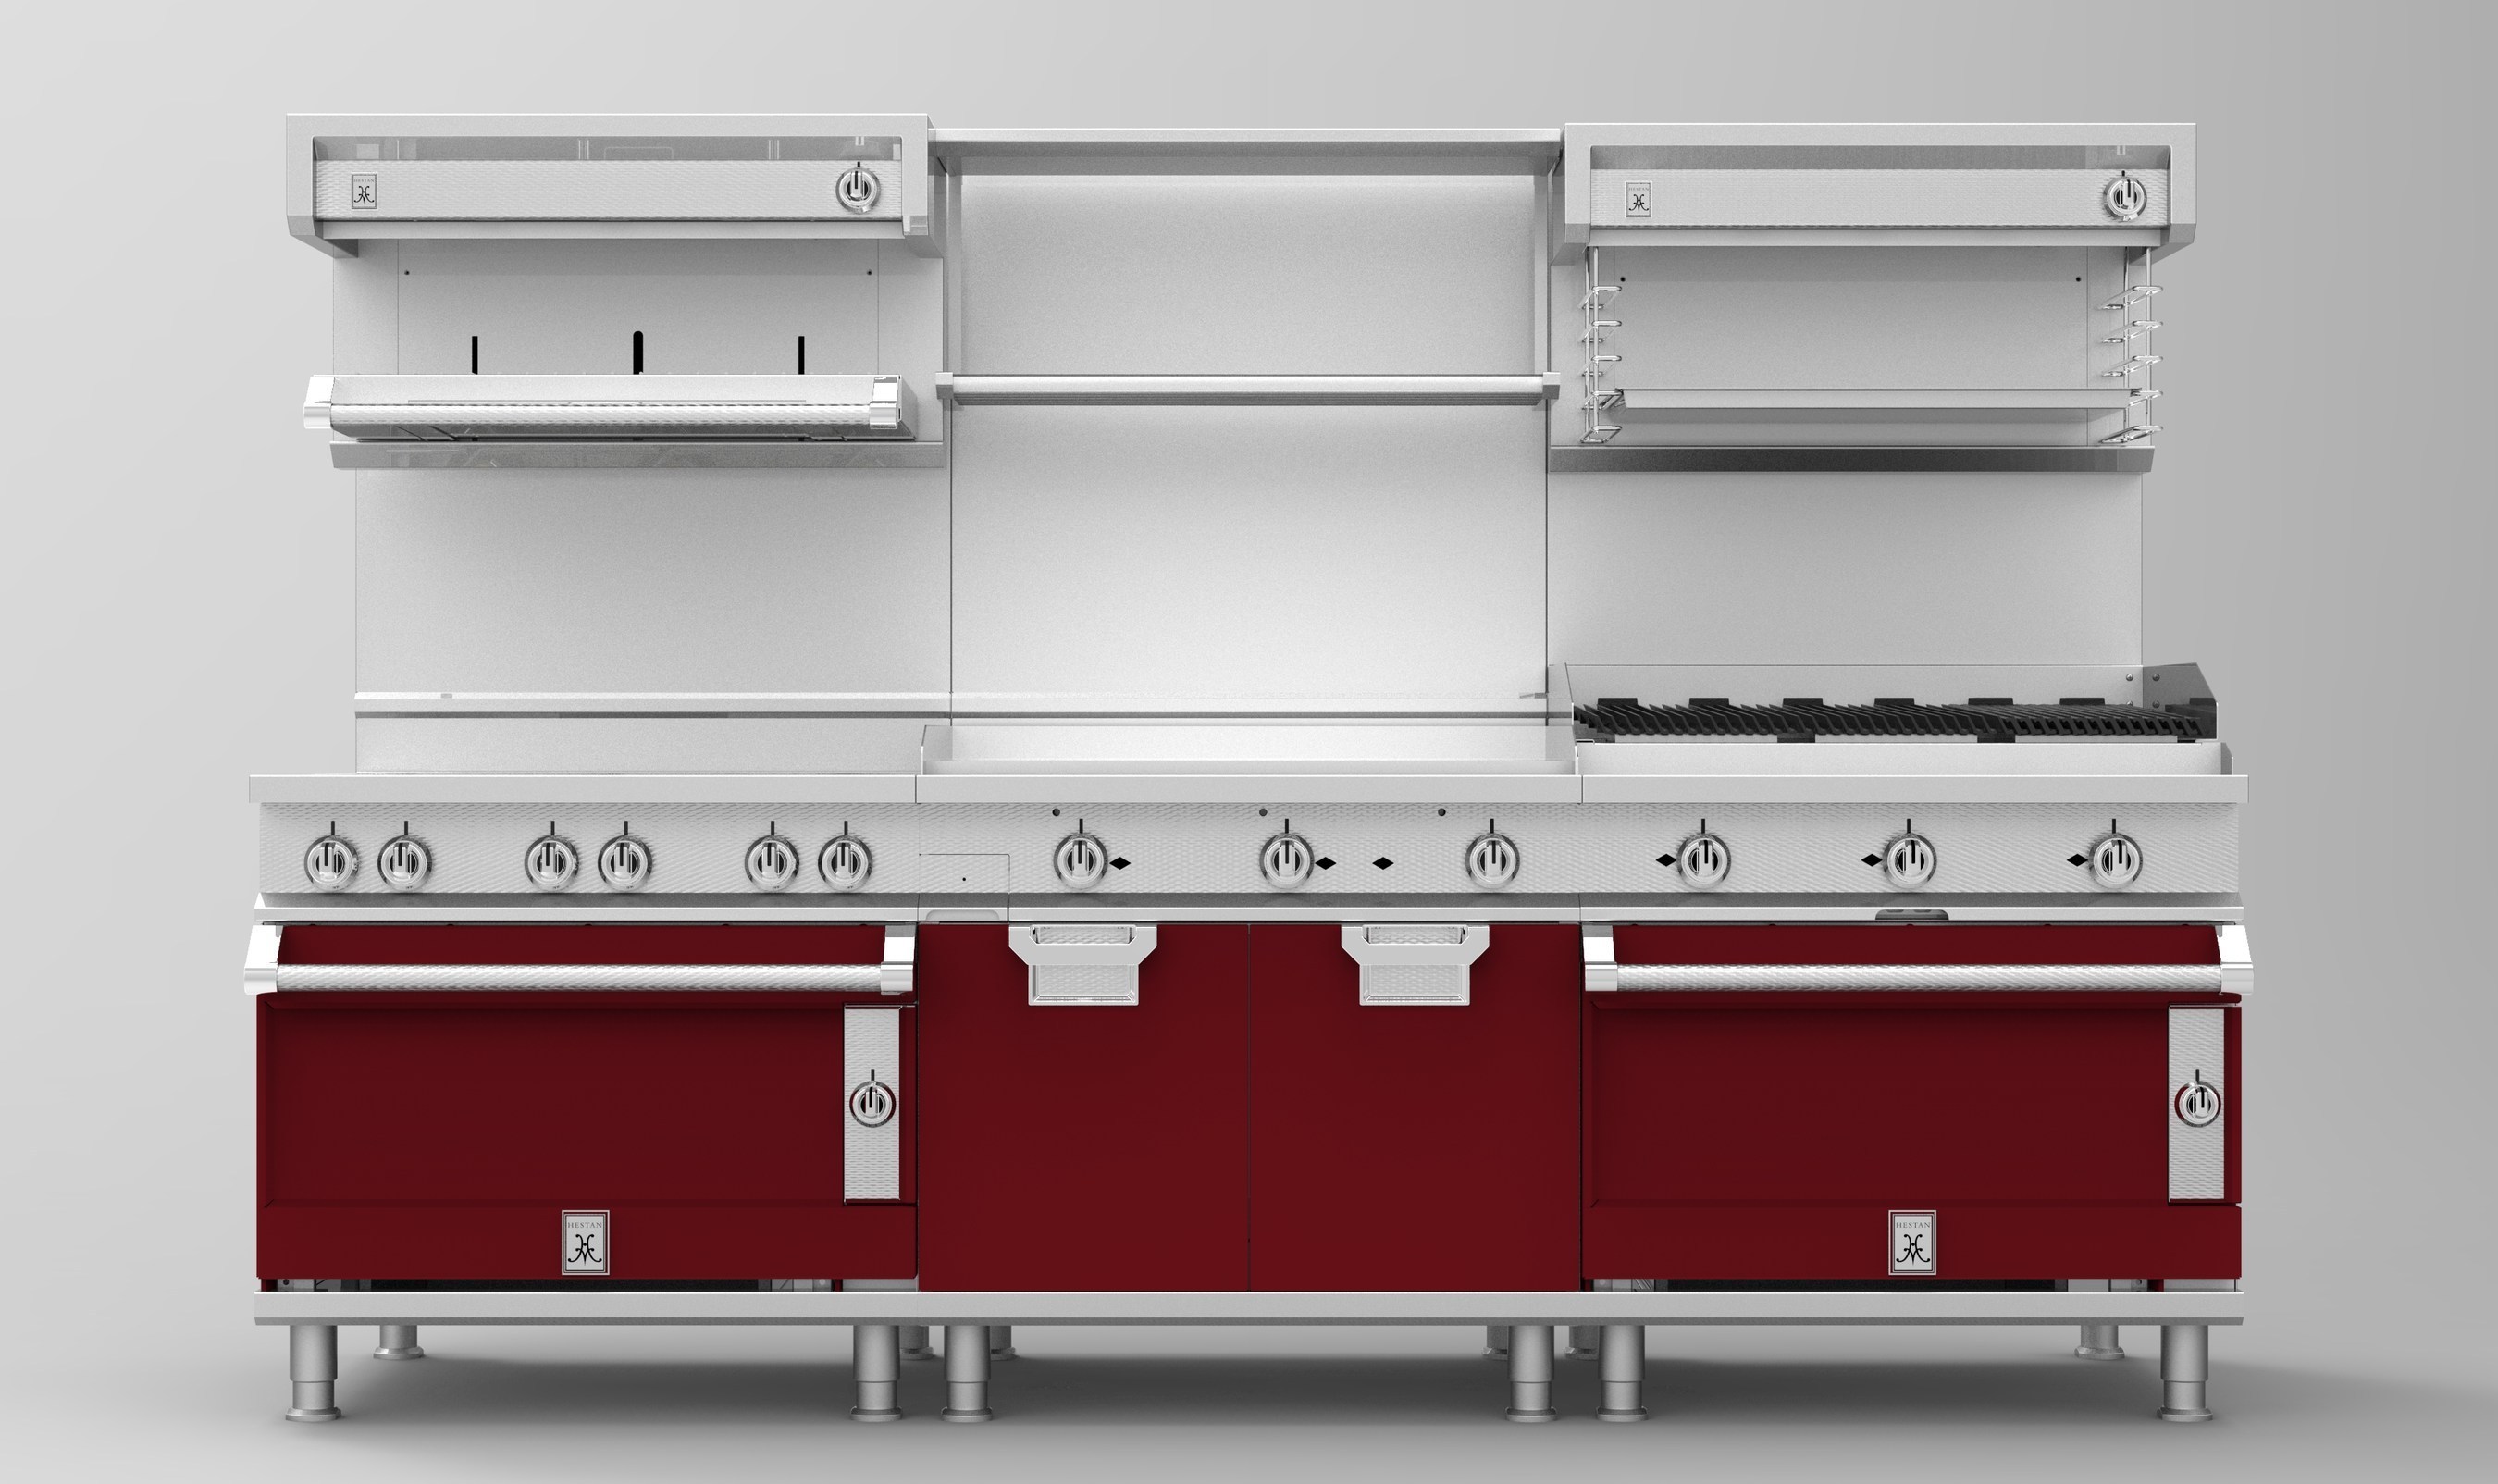 Made entirely in the USA, Hestan Commercial is available in twelve different exclusive color finishes and customizable Marquise accents. The lineup includes freestanding ranges with sealed burners, island suites, lineups, countertop equipment, convection ovens, griddles, char broilers, French tops, hot tops, planchas, salamanders, cheesemelters, fryers, pasta cookers, and refrigerated bases.